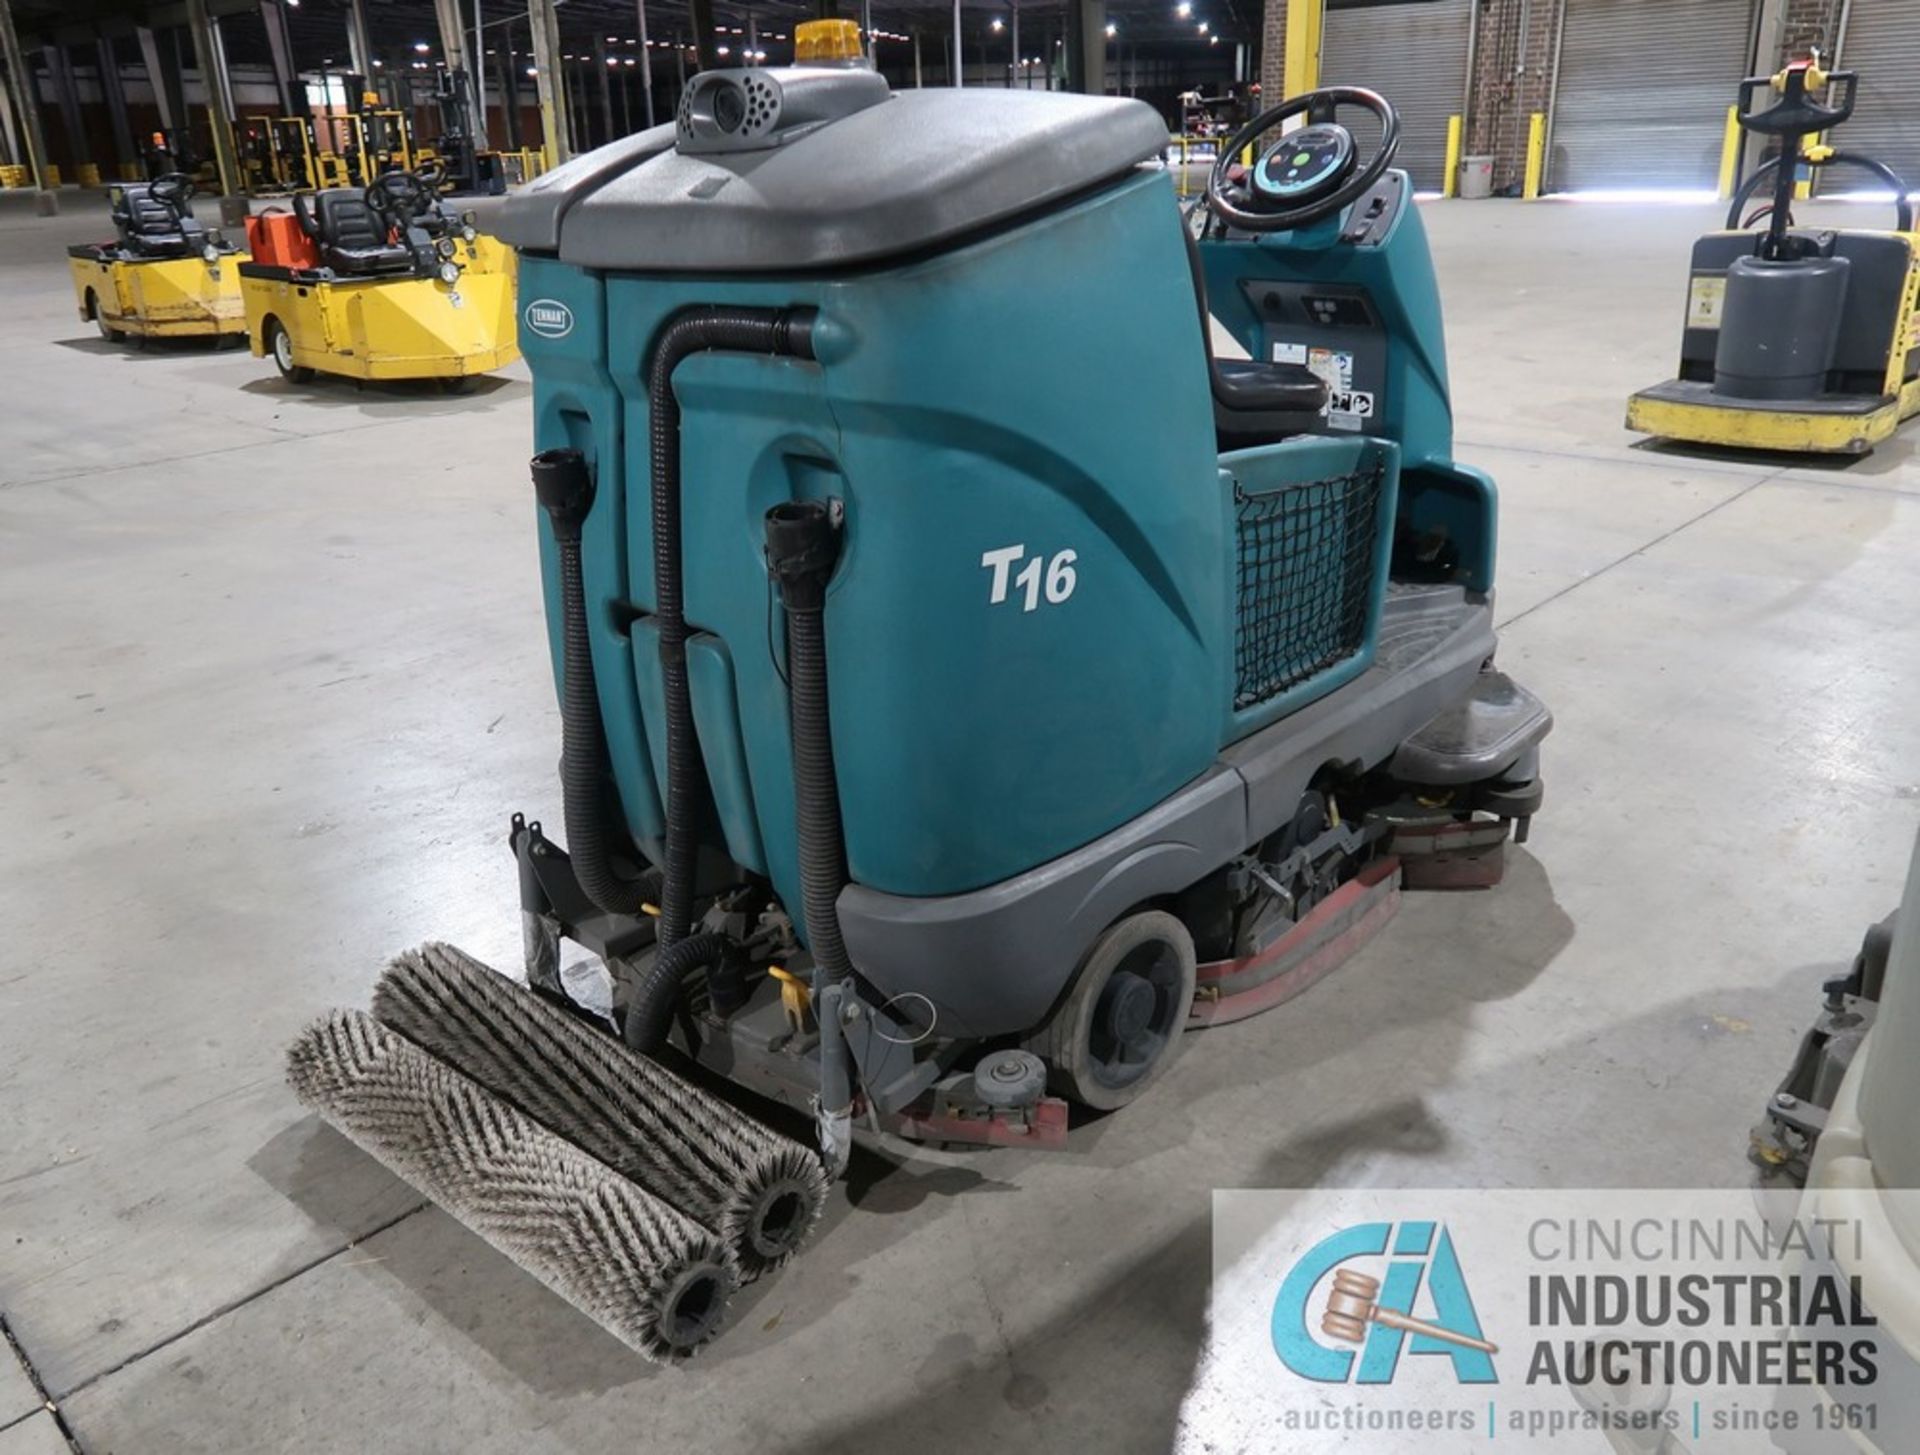 TENNANT MODEL T16 ELECTRIC SIT DOWN FLOOR SCRUBBER; S/N 27316, WITH 36 VOLT CHARGER, HOURS N/A - Image 4 of 11